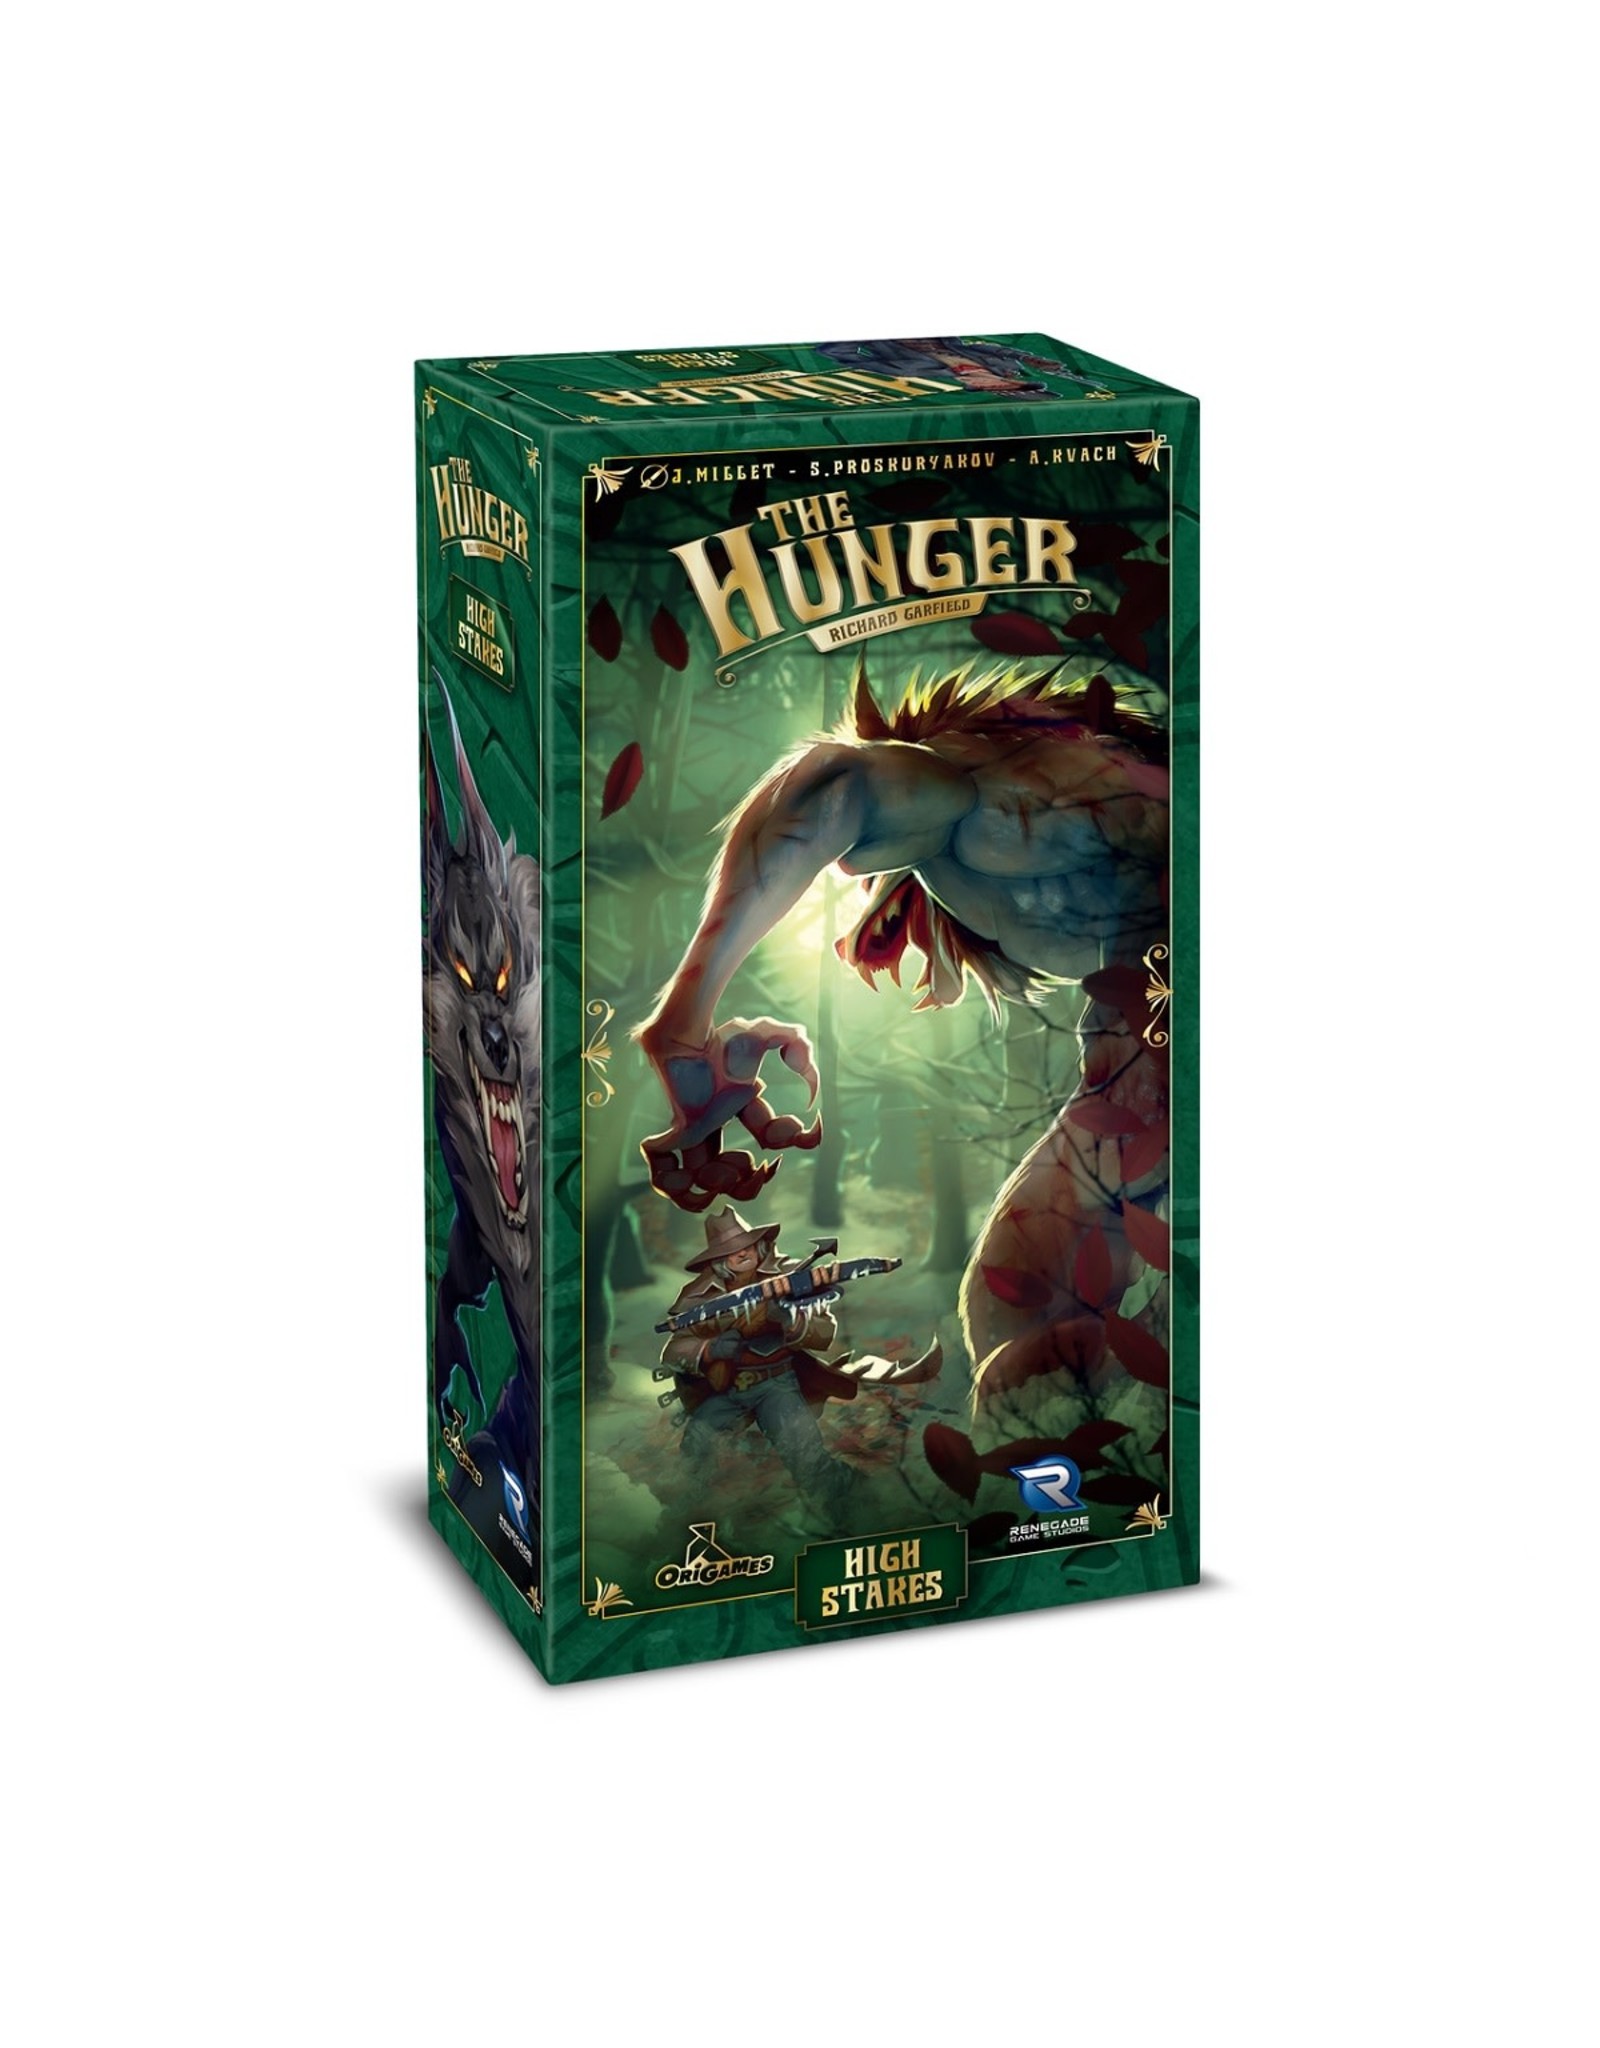 The Hunger: High Stakes Expansion